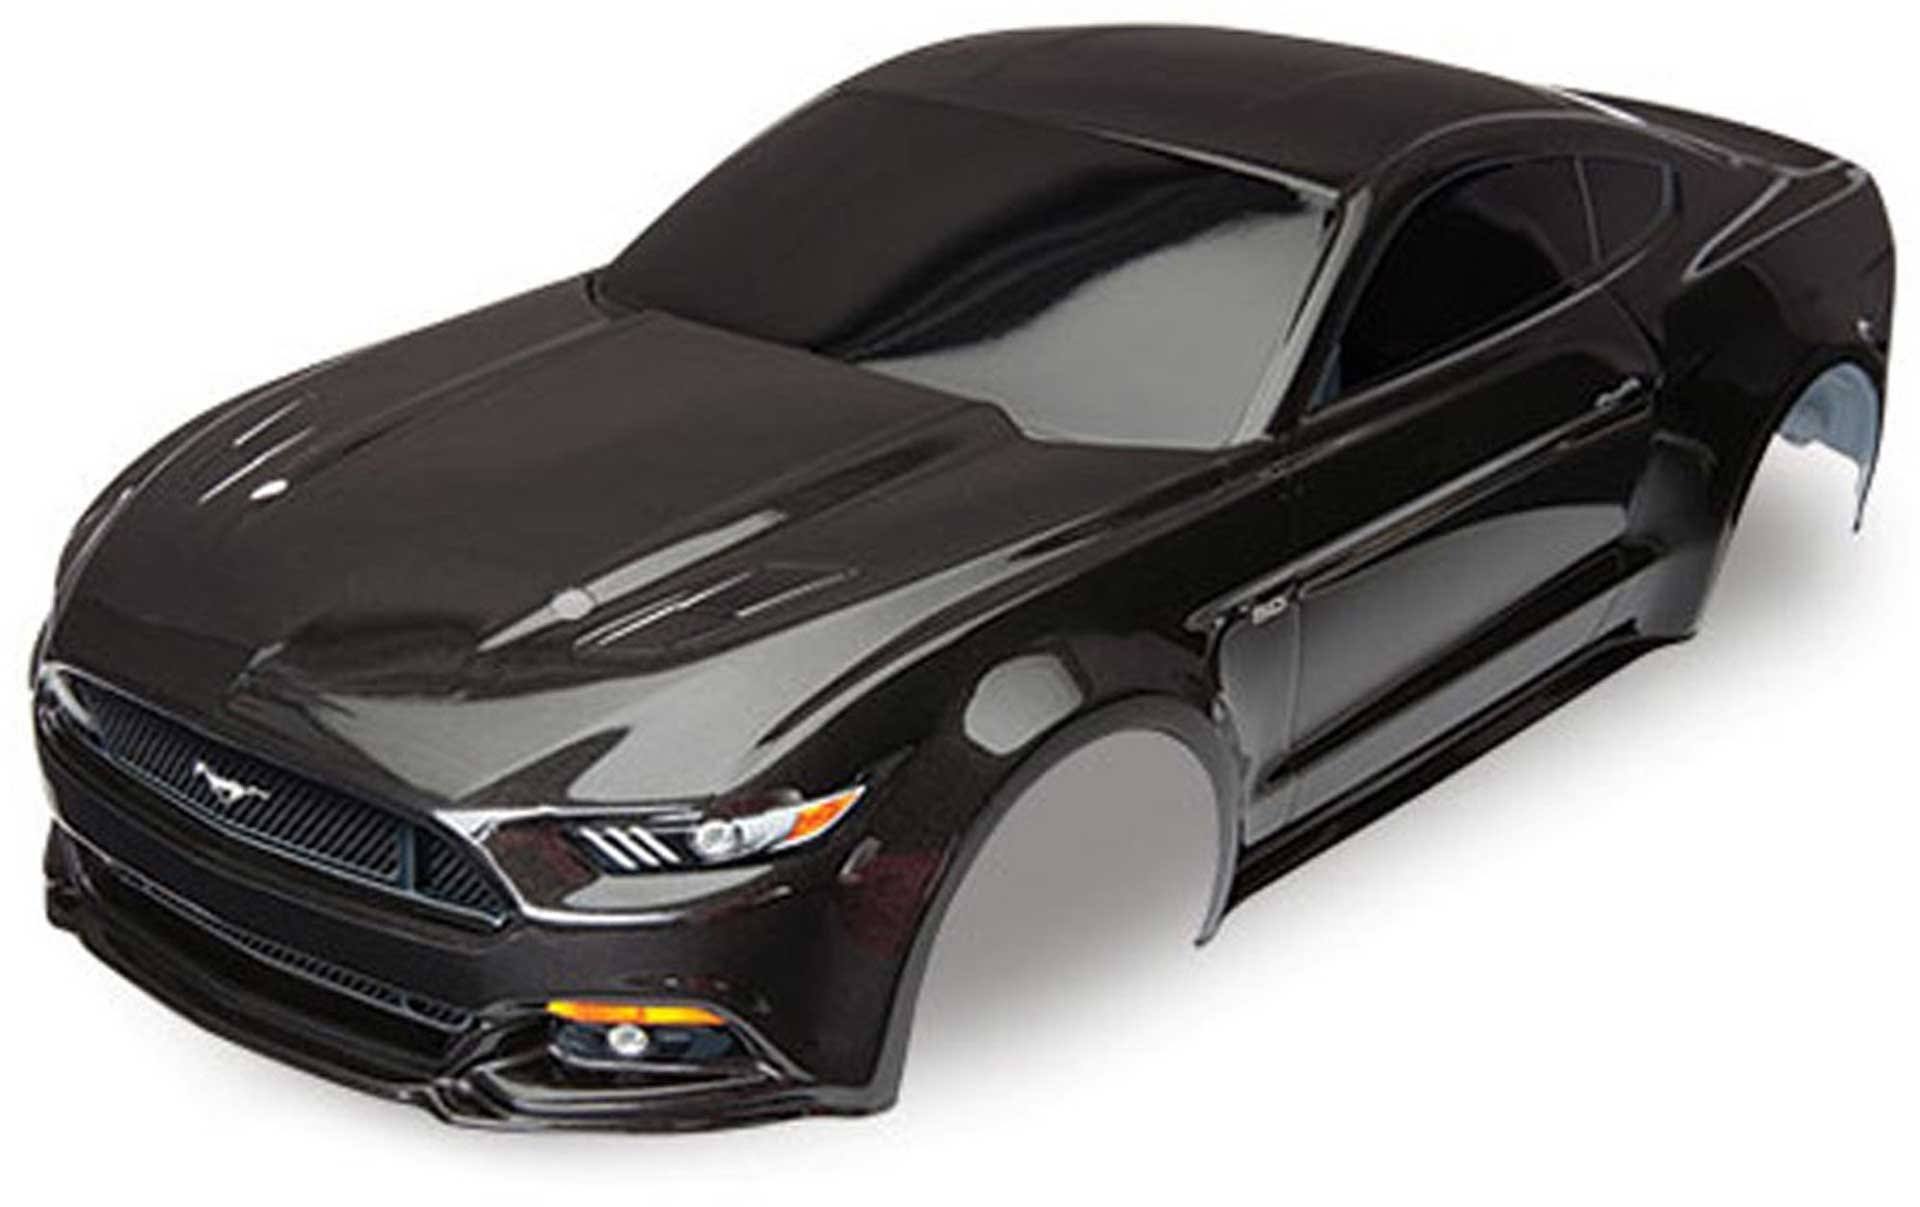 Traxxas Tra8312x RC Vehicle Ford Mustang Black Painted Body